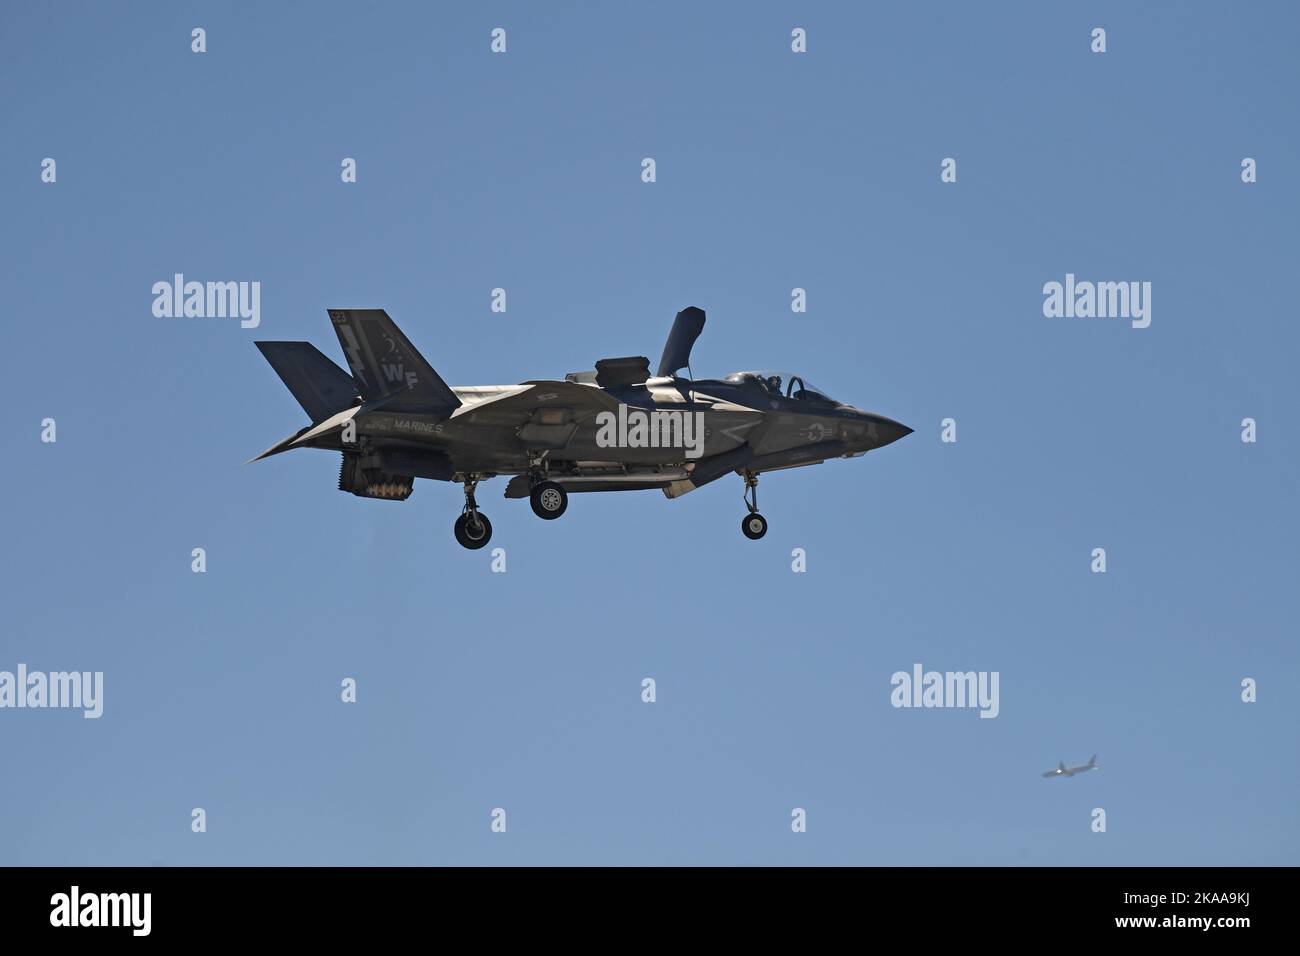 USMC F-35B in hovers at MCAS Miramar in San Diego, California Stock Photo